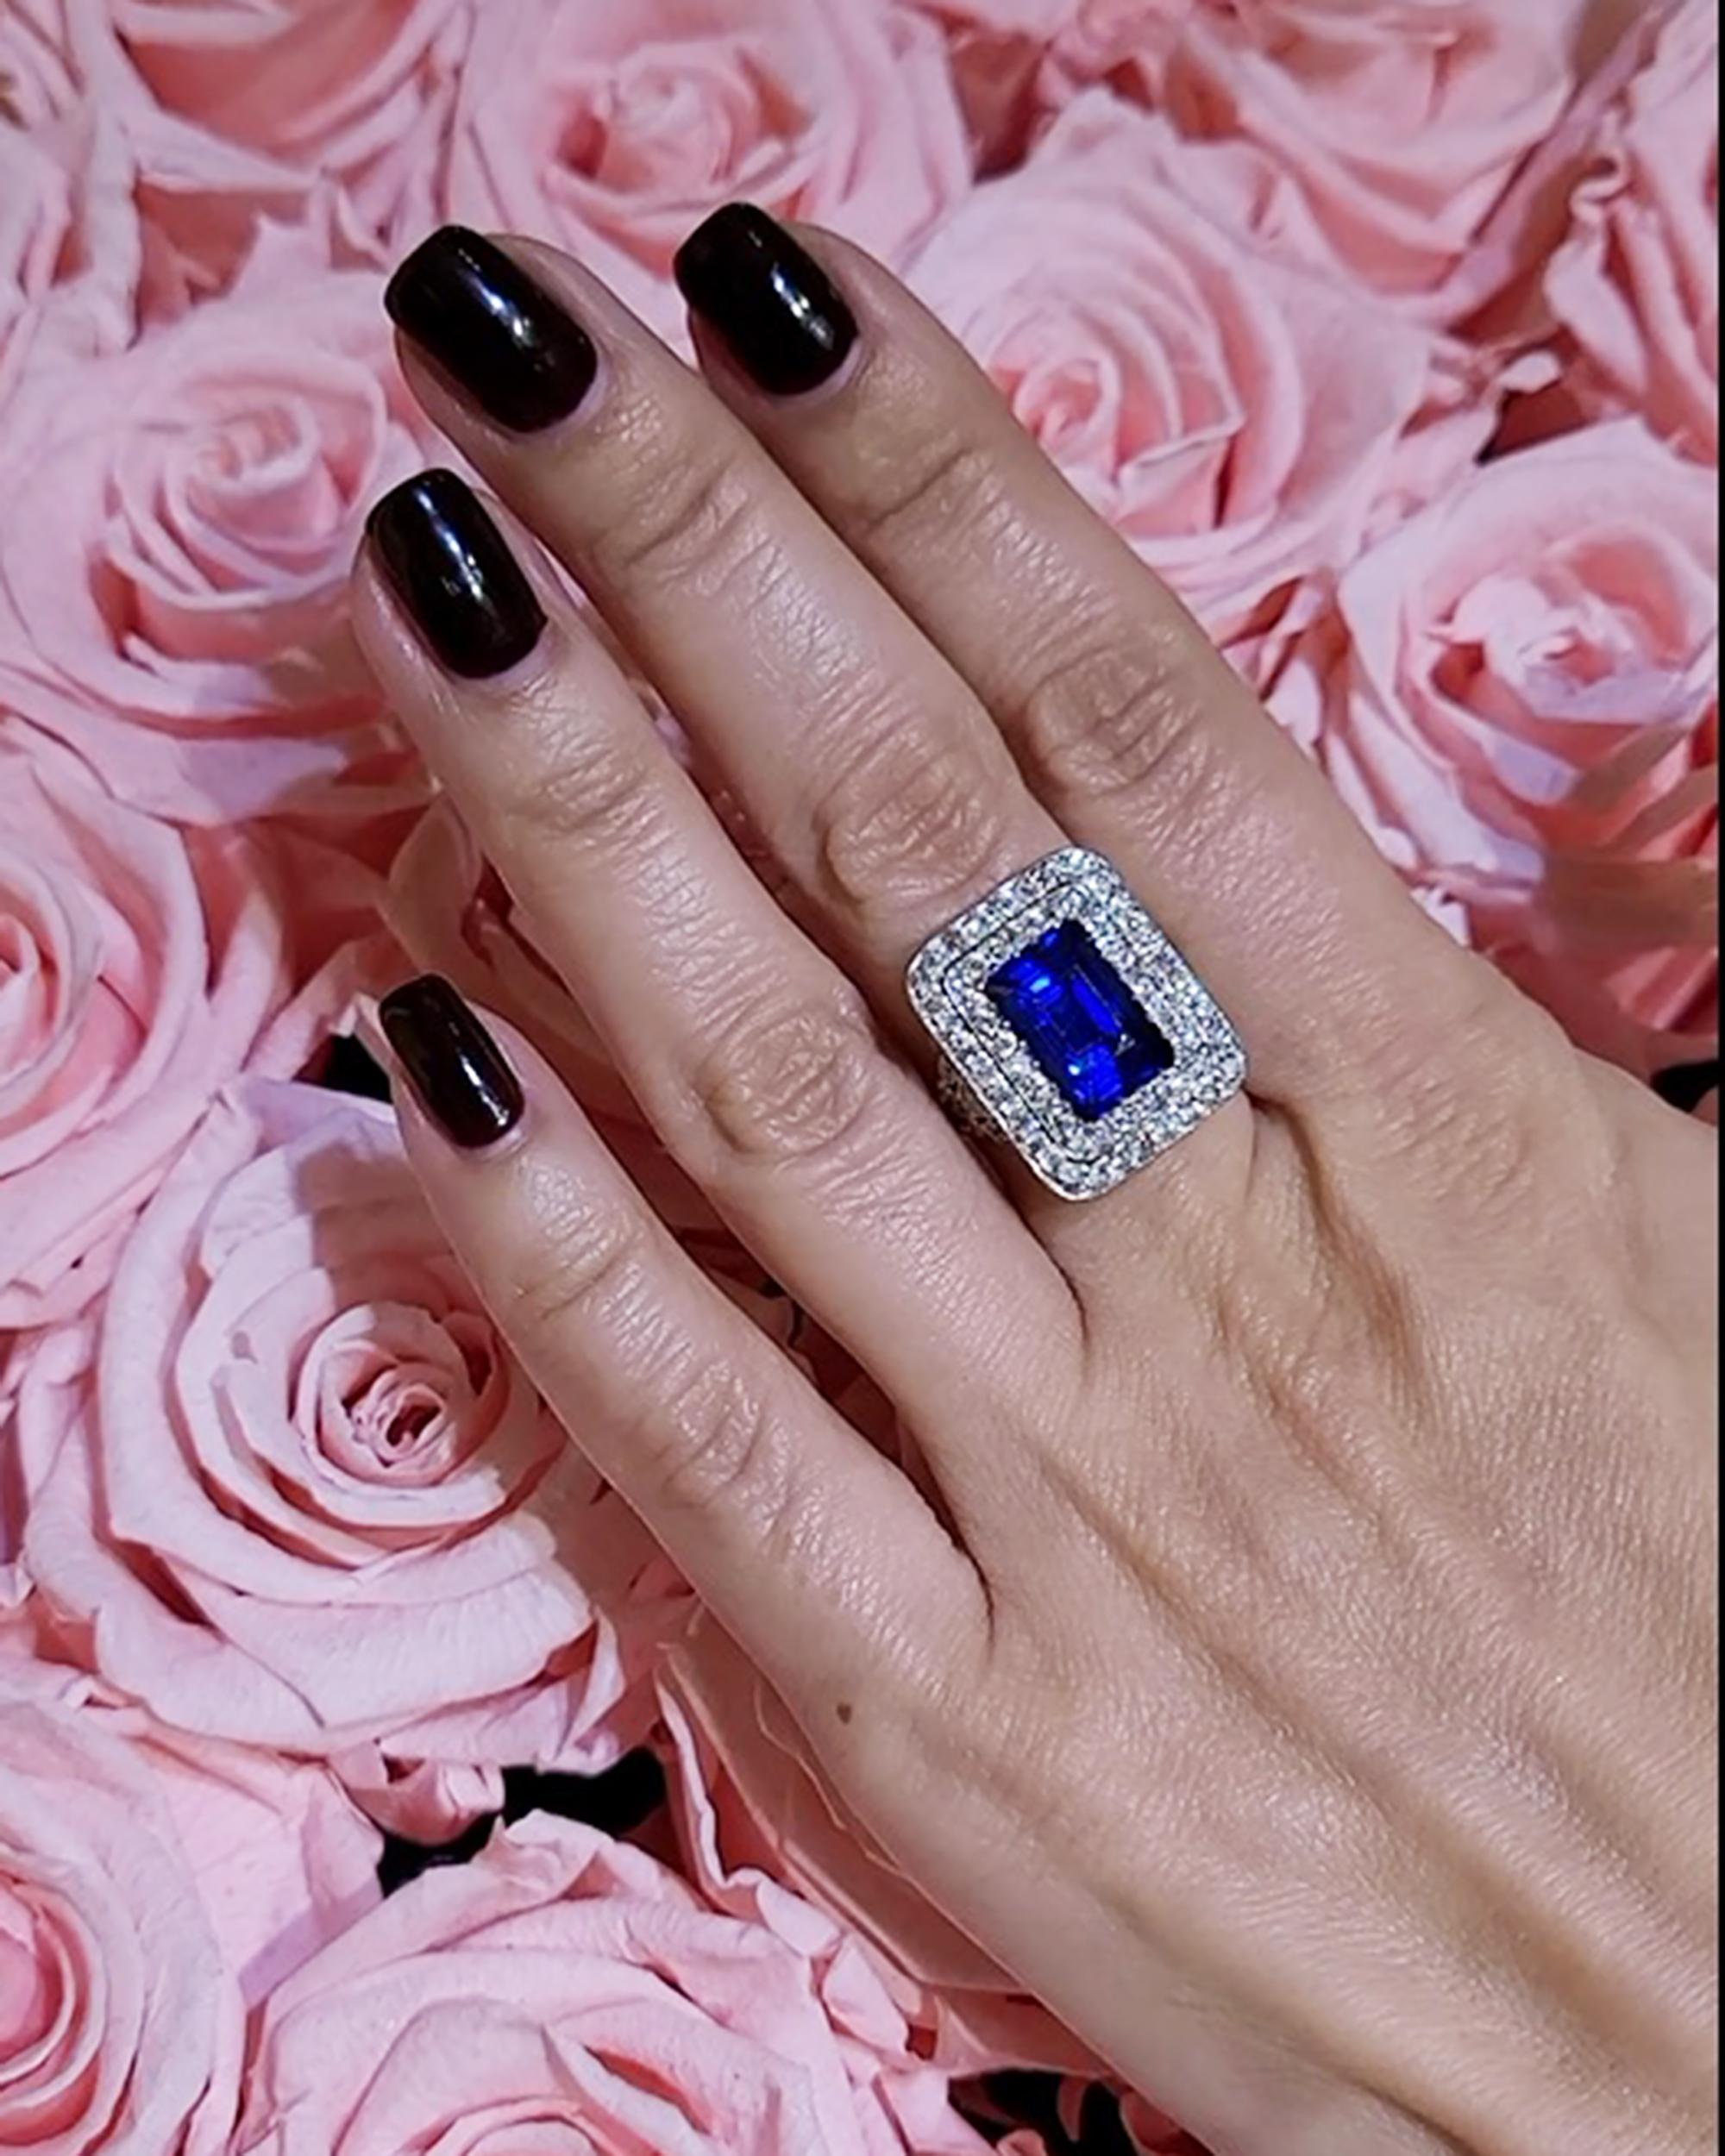 Introducing the Tiffany & Co. Antique Burma Sapphire Diamond Ring - a mesmerizing testament to timeless elegance and exceptional craftsmanship. This exquisite piece features a breathtaking 7-carat sapphire of Burma origin, distinguished by its rare,